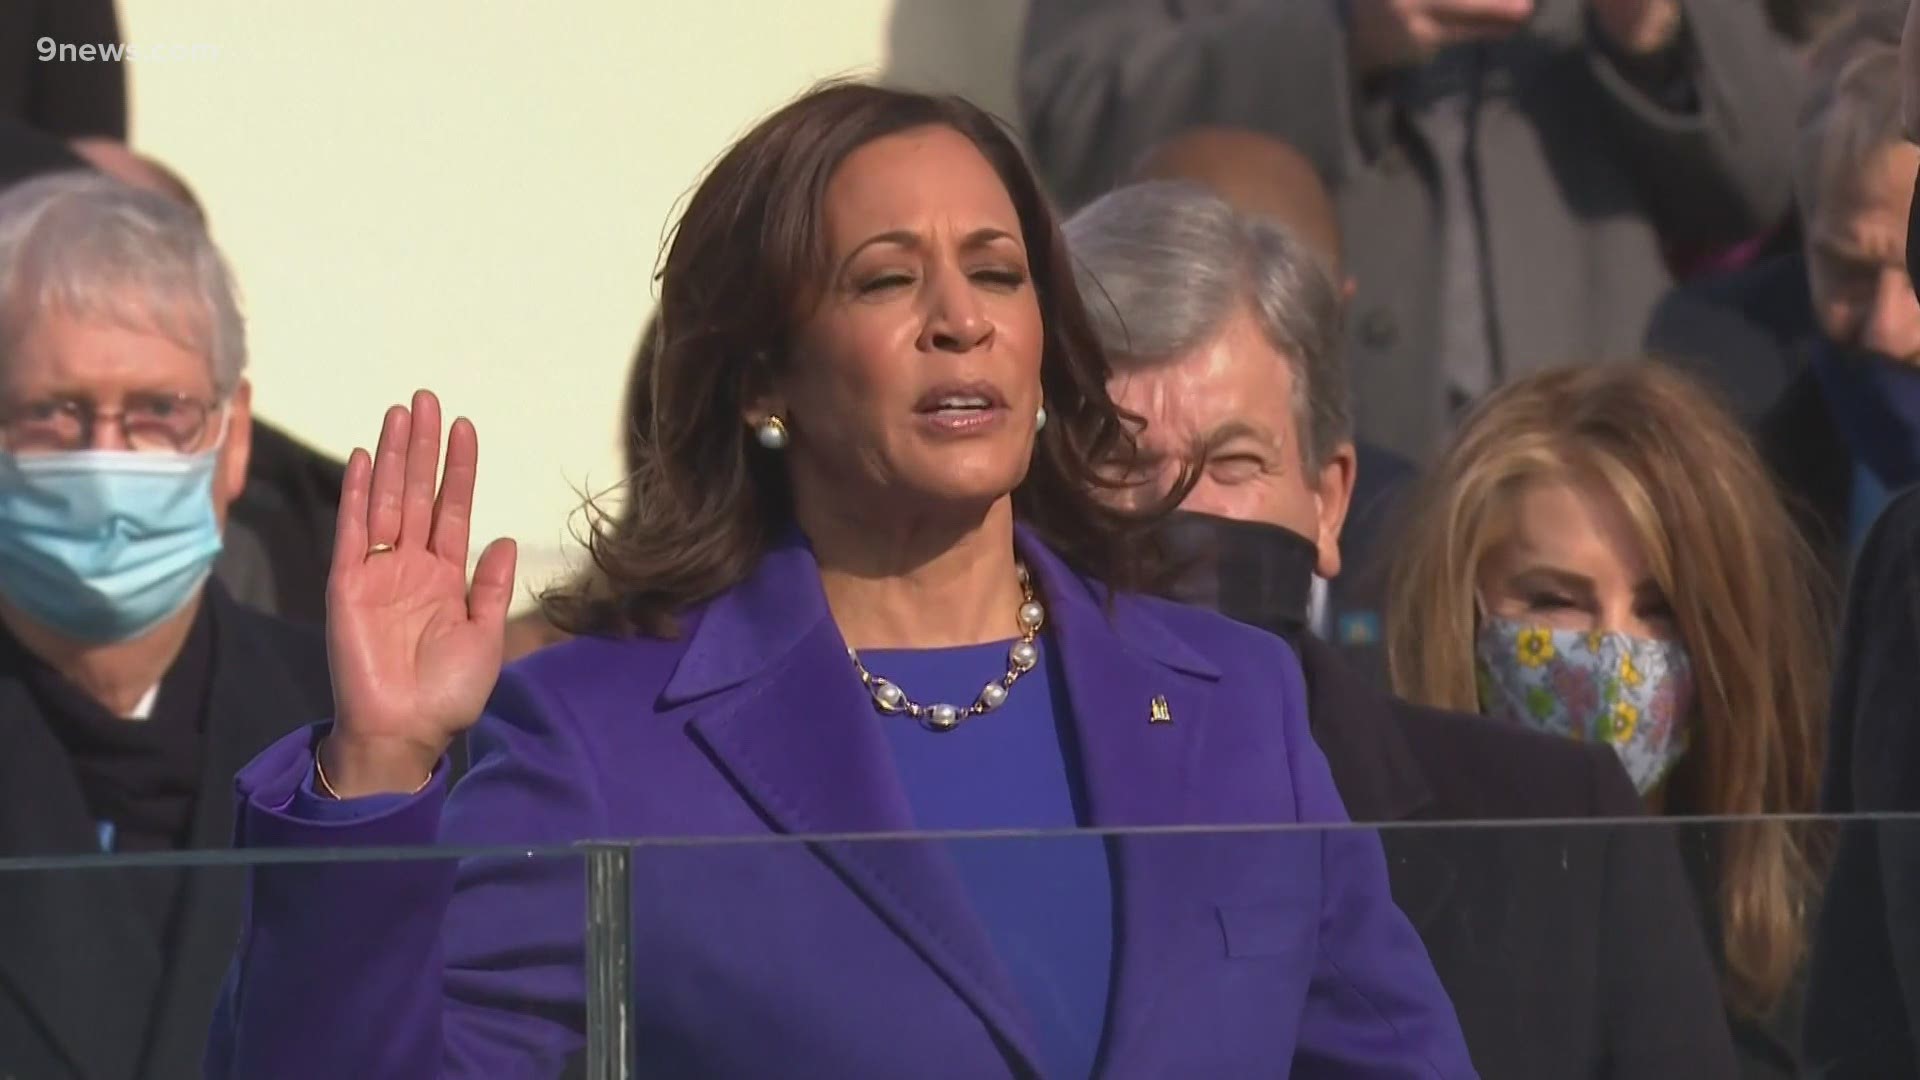 Vice President Kamala Harris made history today and a local political organization hopes to use that to recruit women in Colorado to run for office.